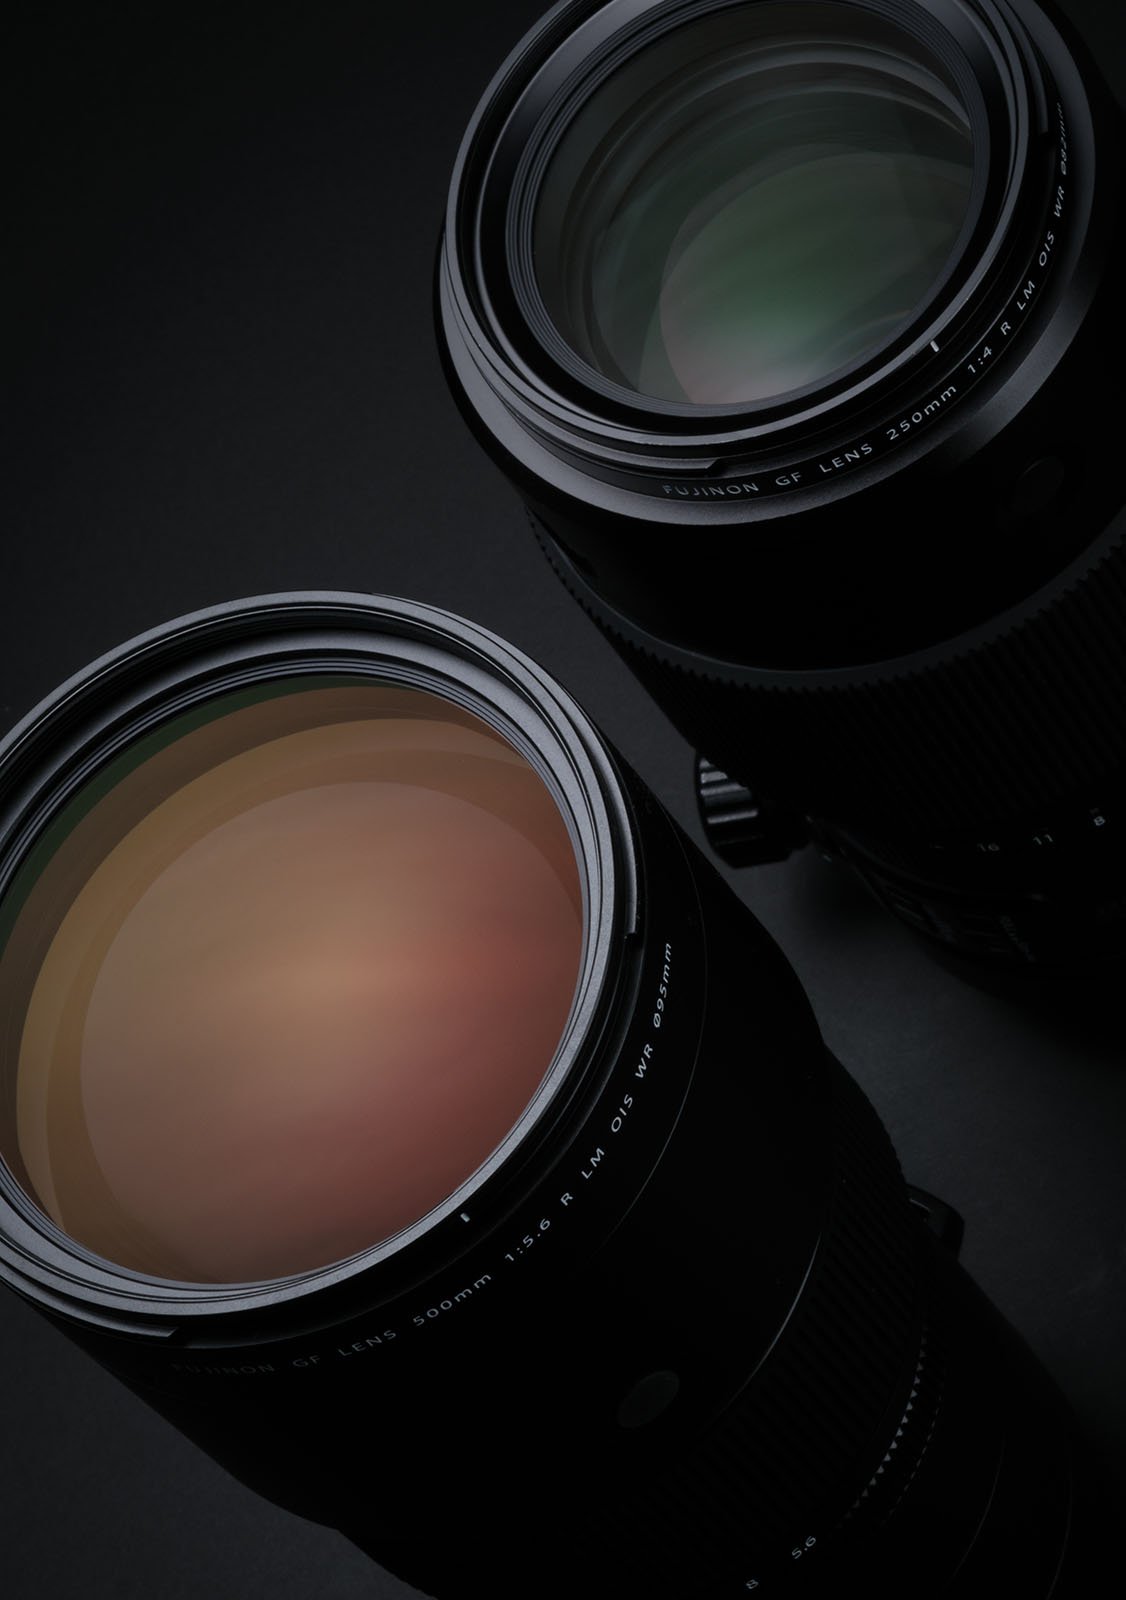 Close-up view of two camera lenses with large glass elements, positioned diagonally against a dark background. The lenses, reflecting subtle hues of green and orange, showcase their intricate design details and barrel markings.